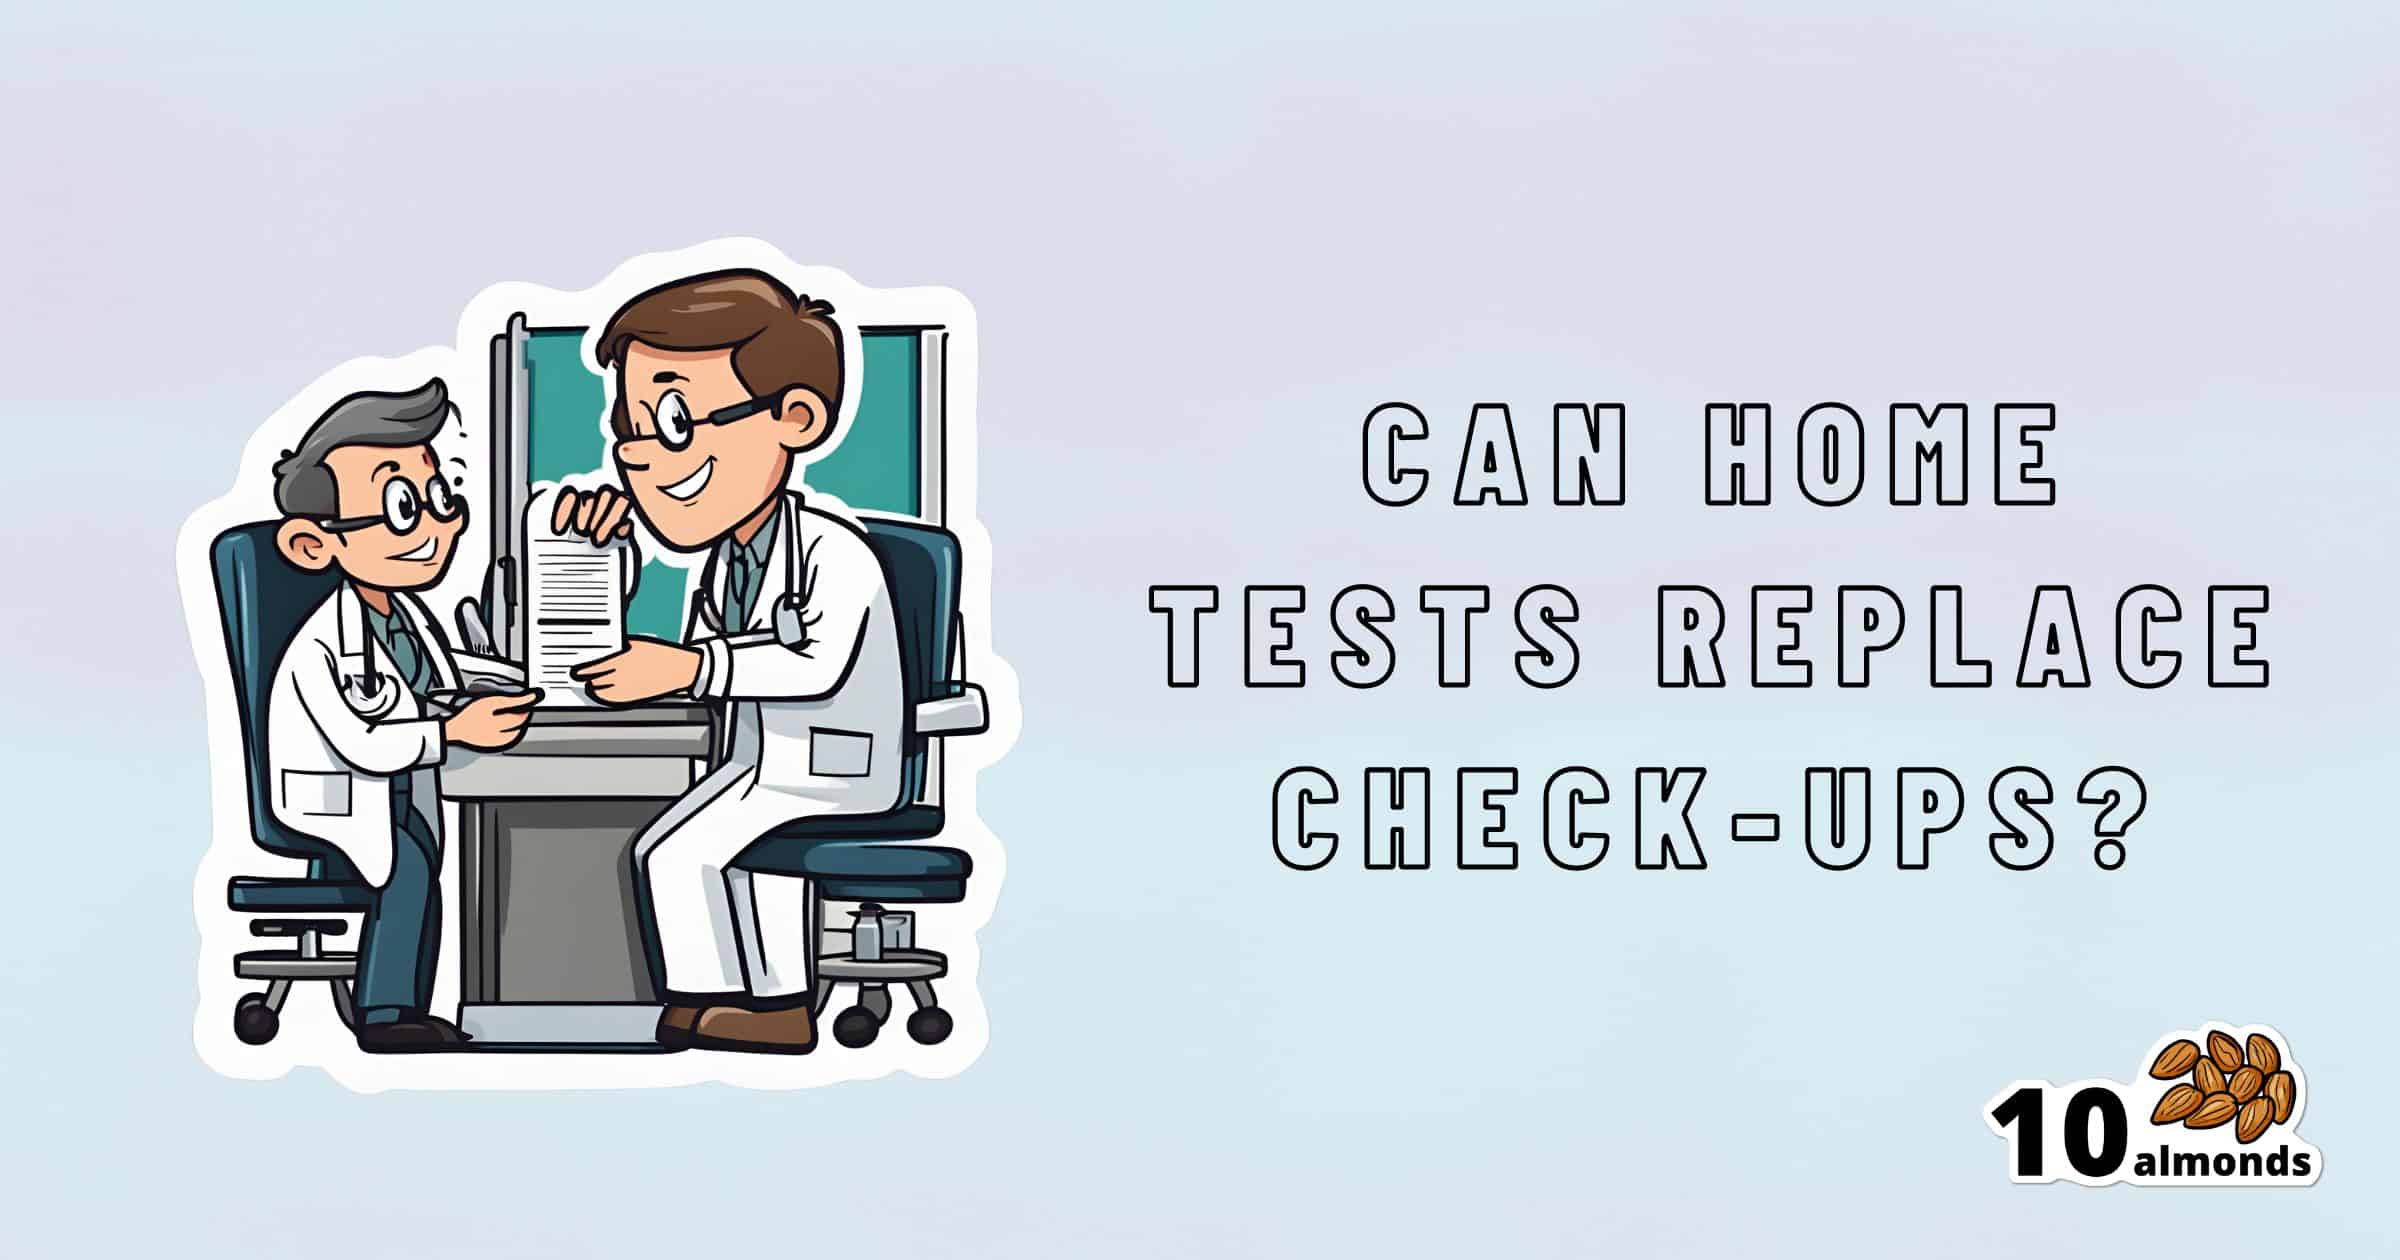 An illustrated image shows two doctors sitting at a desk, examining documents. To the right, text reads, "Can home tests replace check-ups?" In the bottom right corner, there is a logo featuring 10 almonds. The background has a light blue gradient.